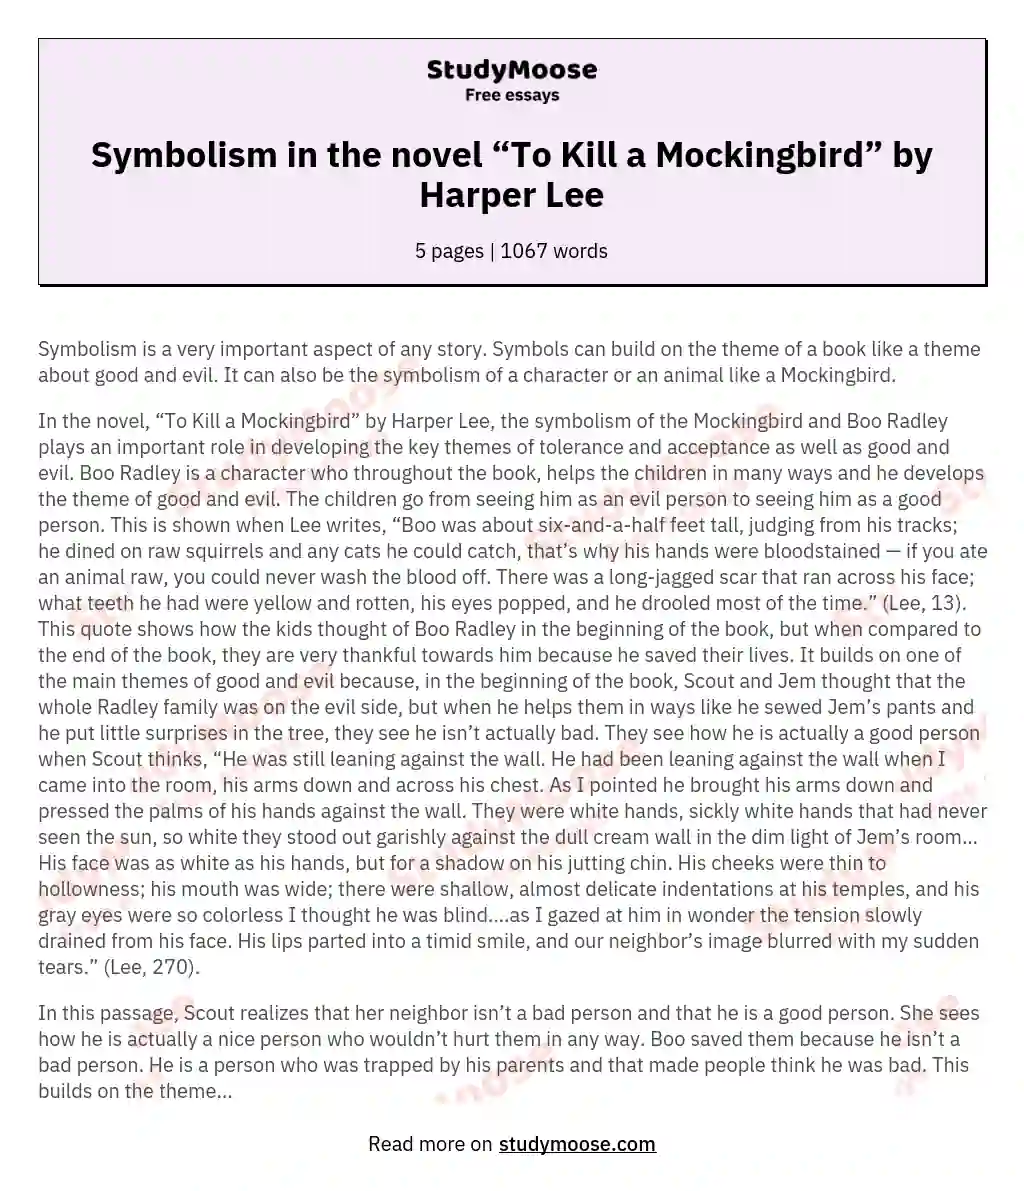 Symbolism in the novel “To Kill a Mockingbird” by Harper Lee